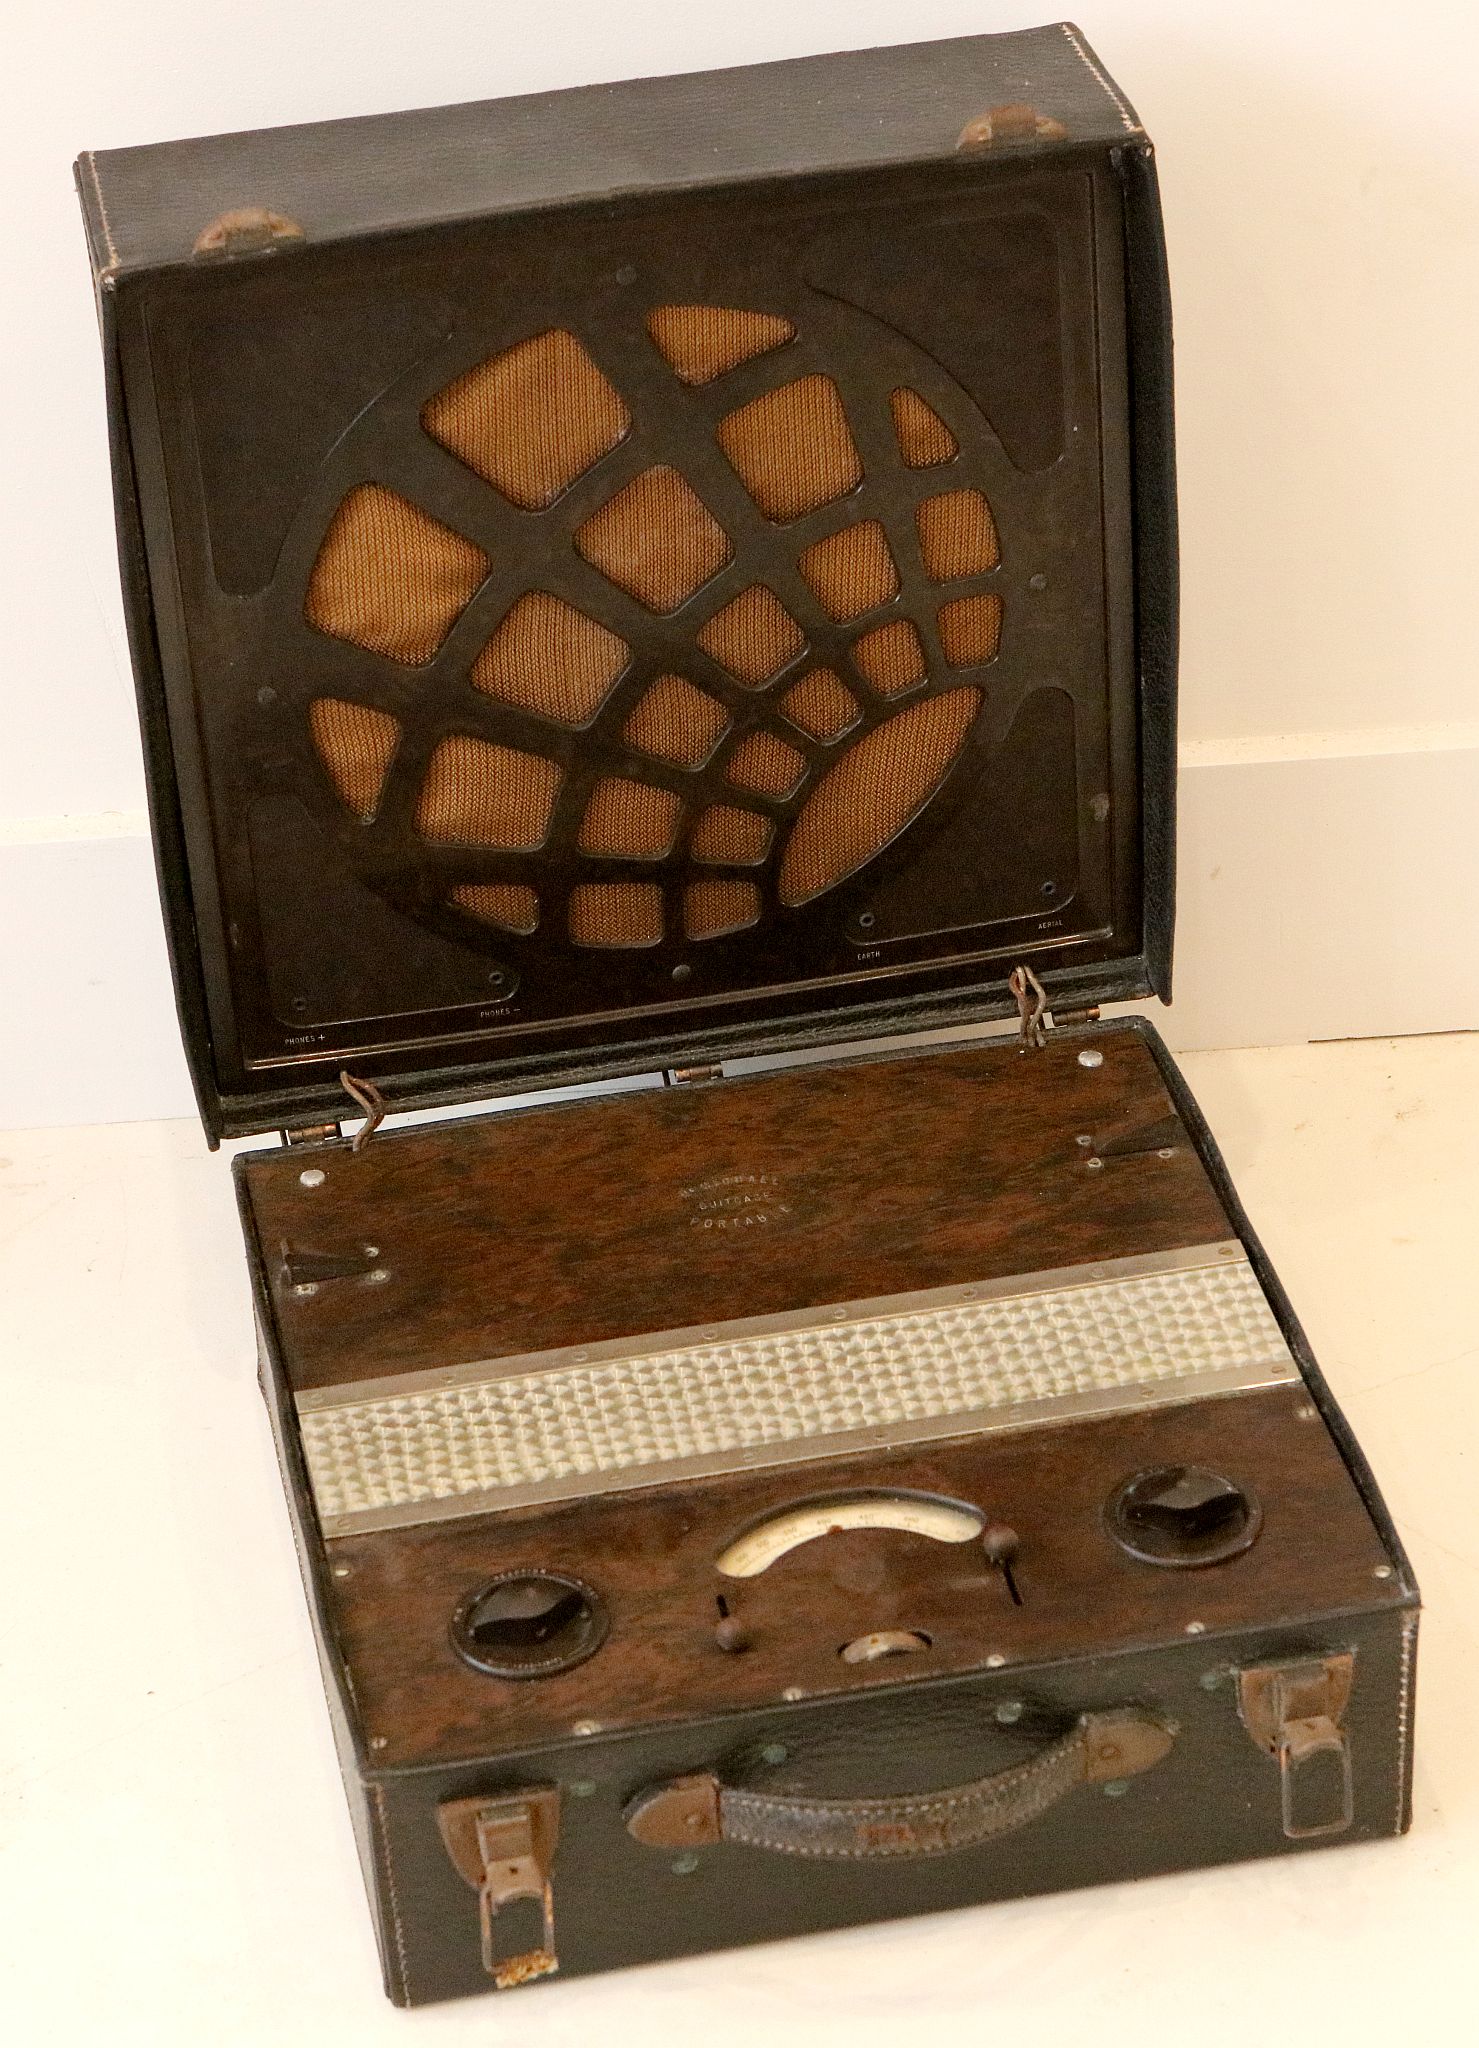 A vintage McMichael suitcase / portable radio with speaker in lid, black finish case, 39 x 39 x 22cm